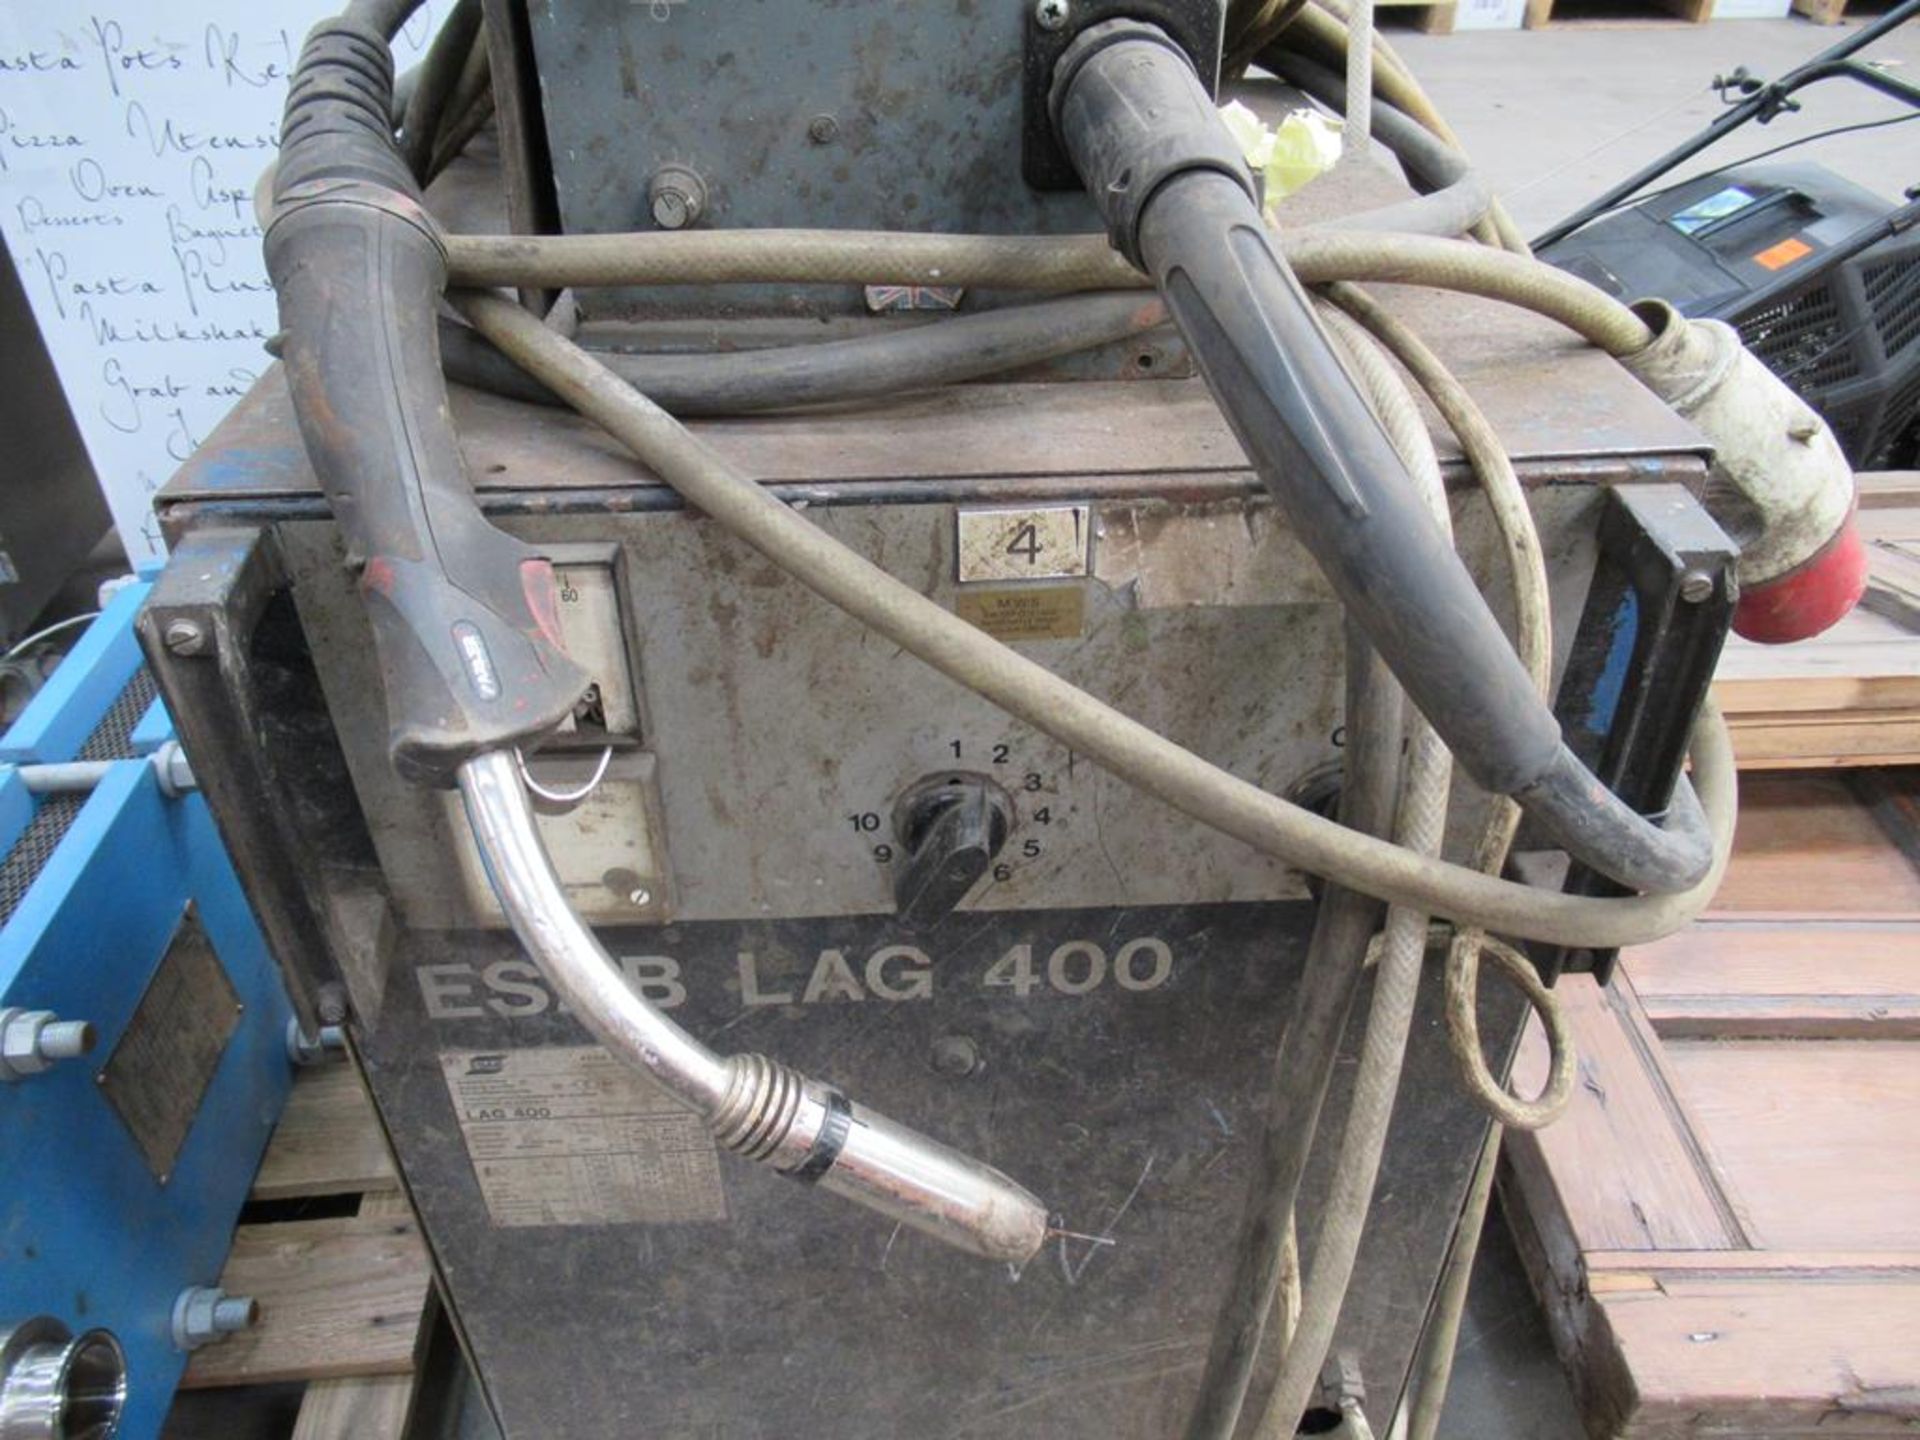 An ESAB Lag 400 3PH Welder complete with Wire Feed - Image 2 of 3